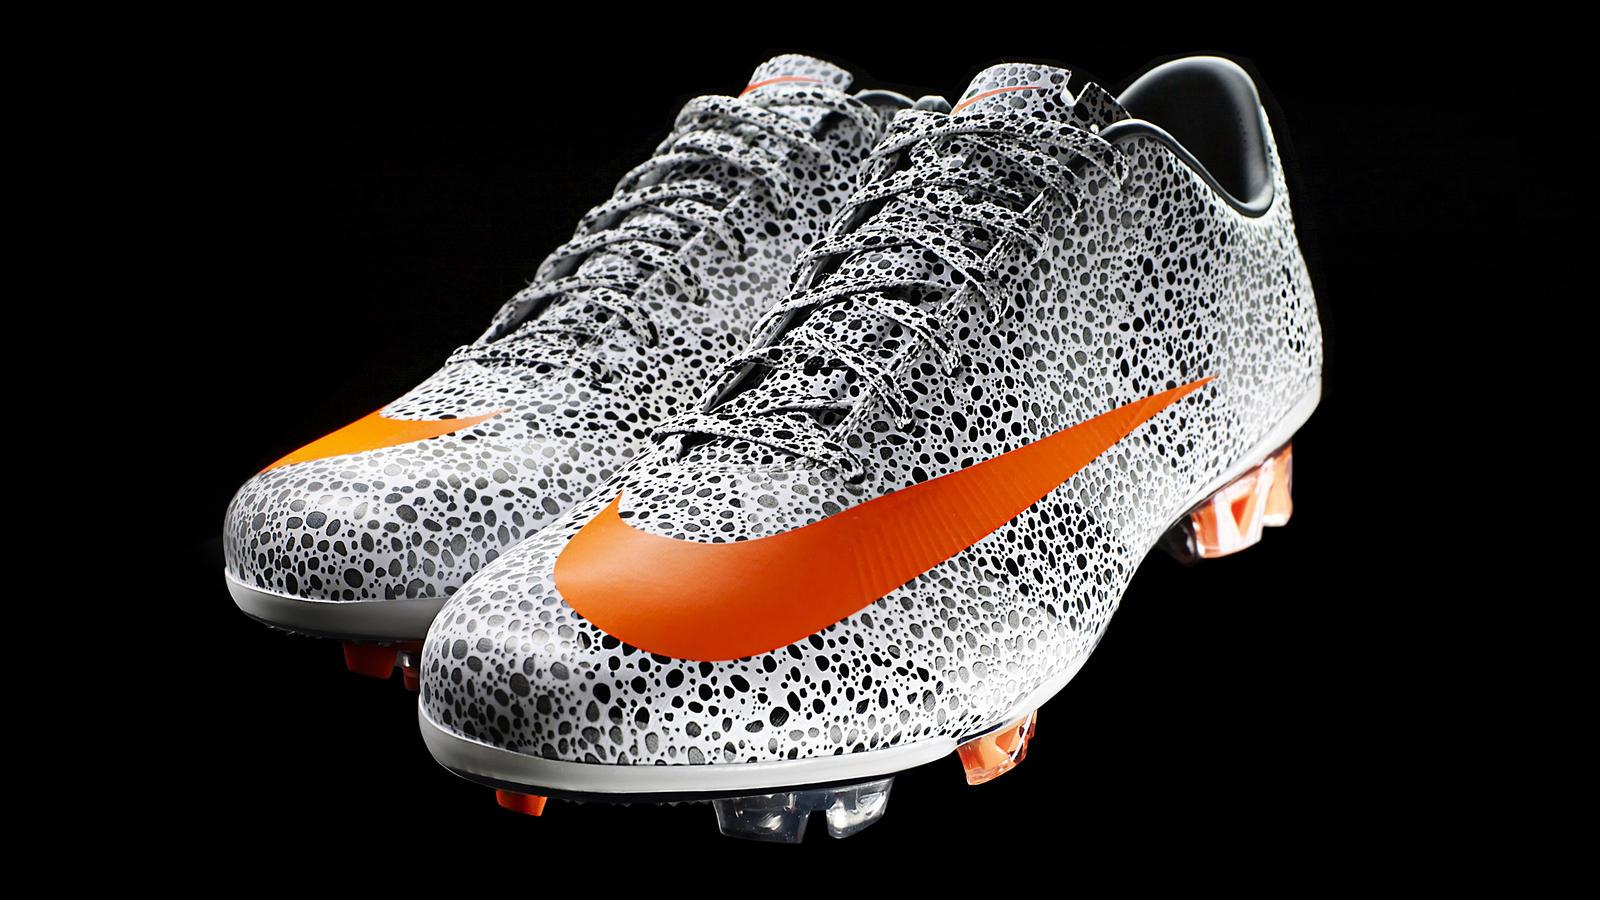 Property of cr7 Nike football boots Soccer boots Soccer shoes